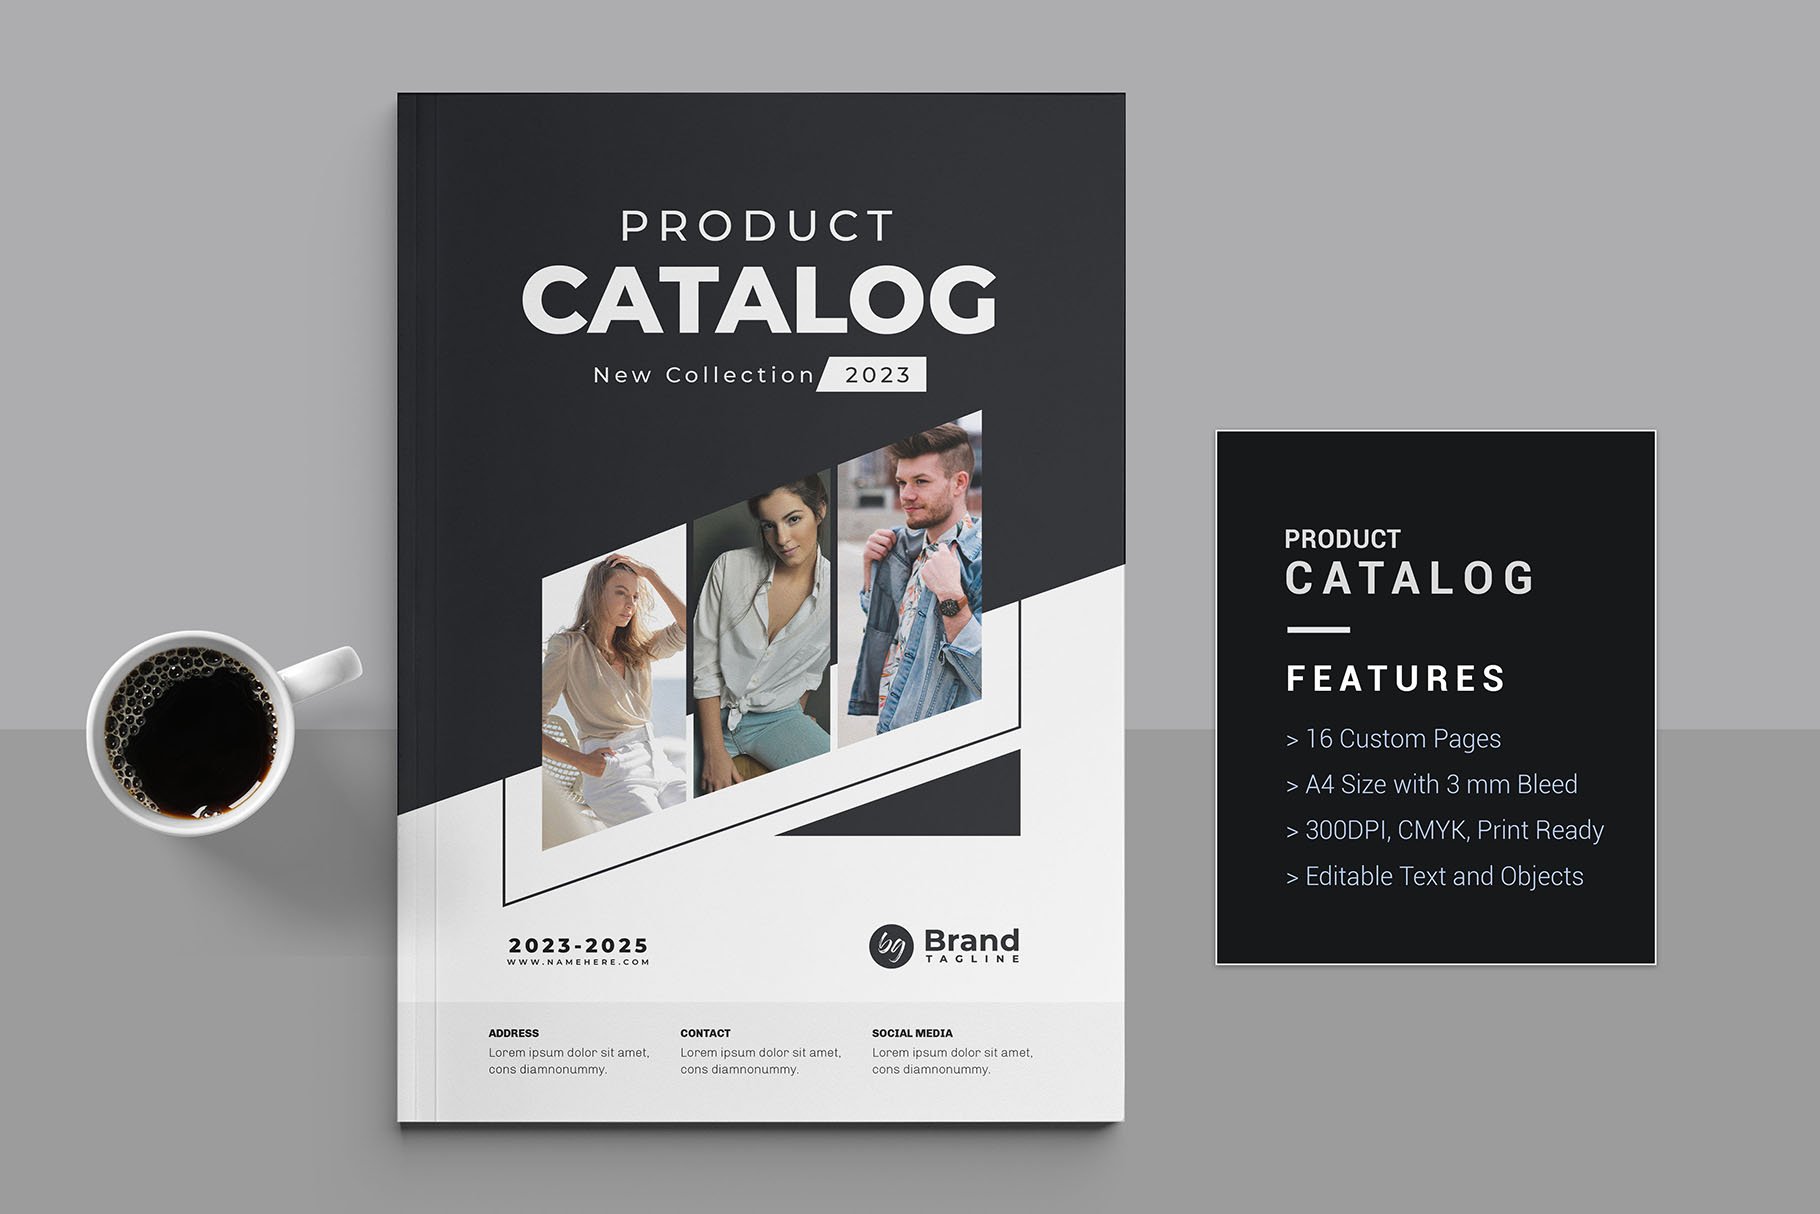 Multipurpose Product Catalog Layout preview image.